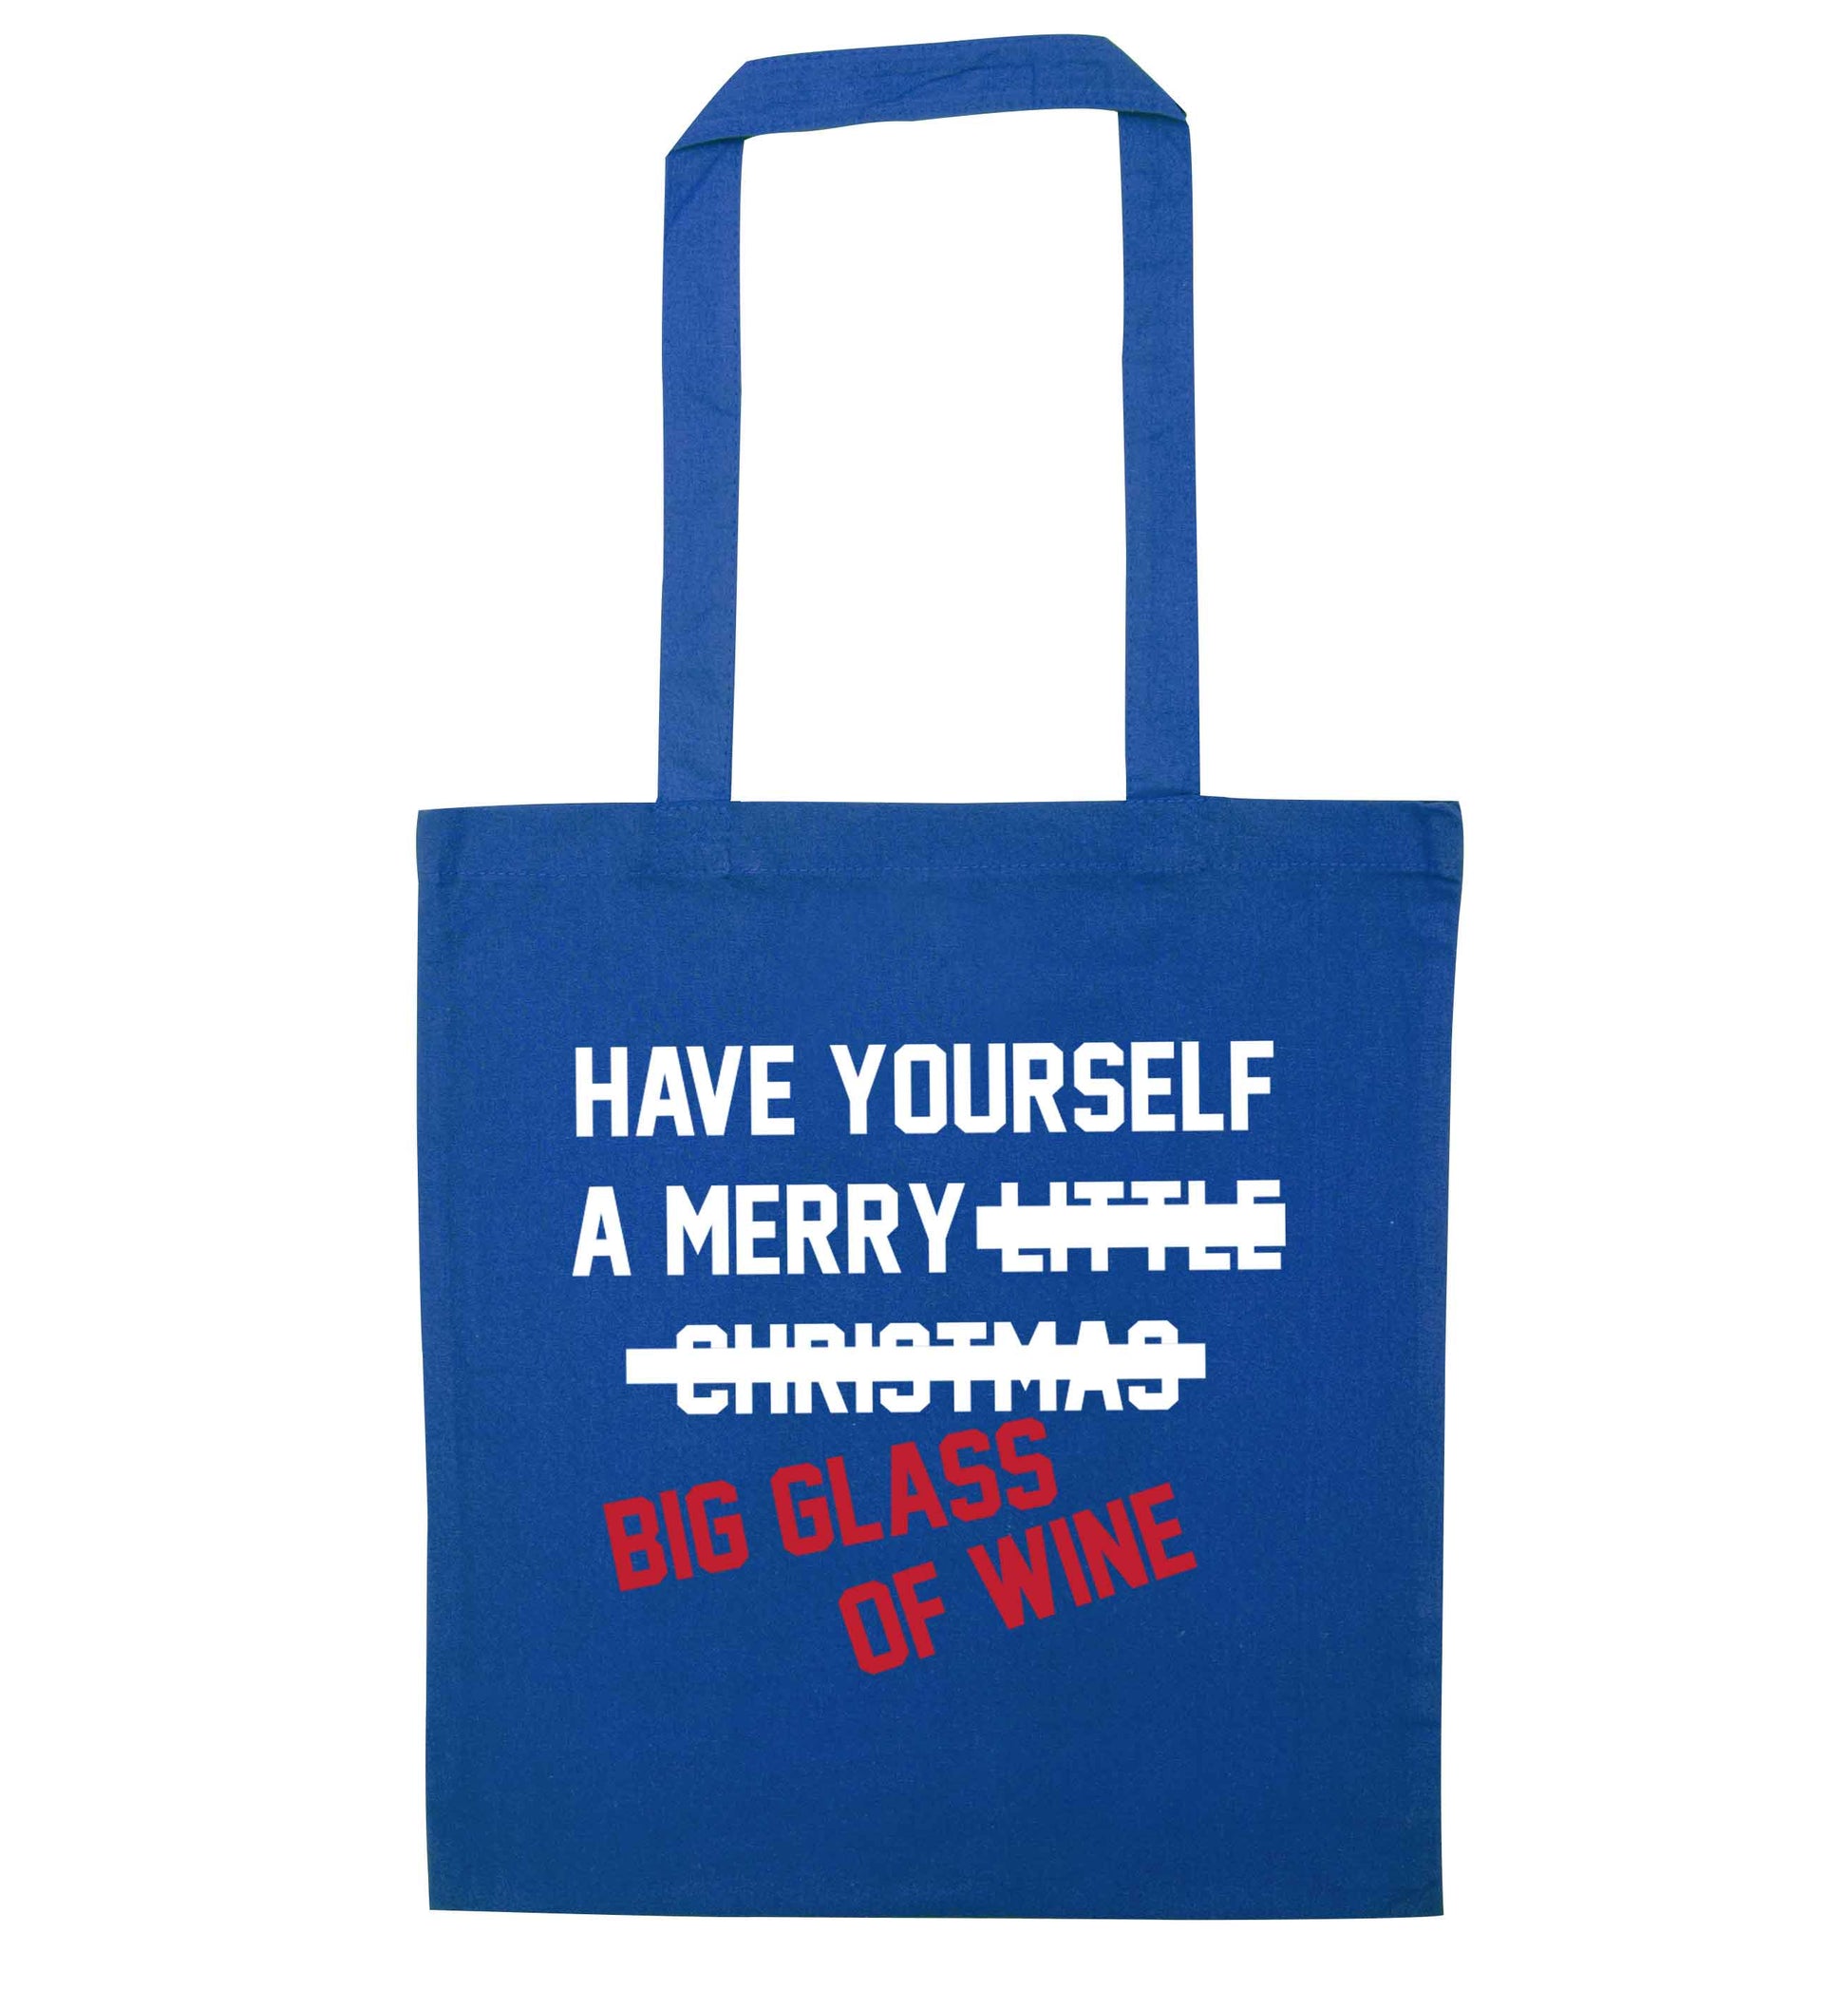 Have yourself a merry big glass of wine blue tote bag